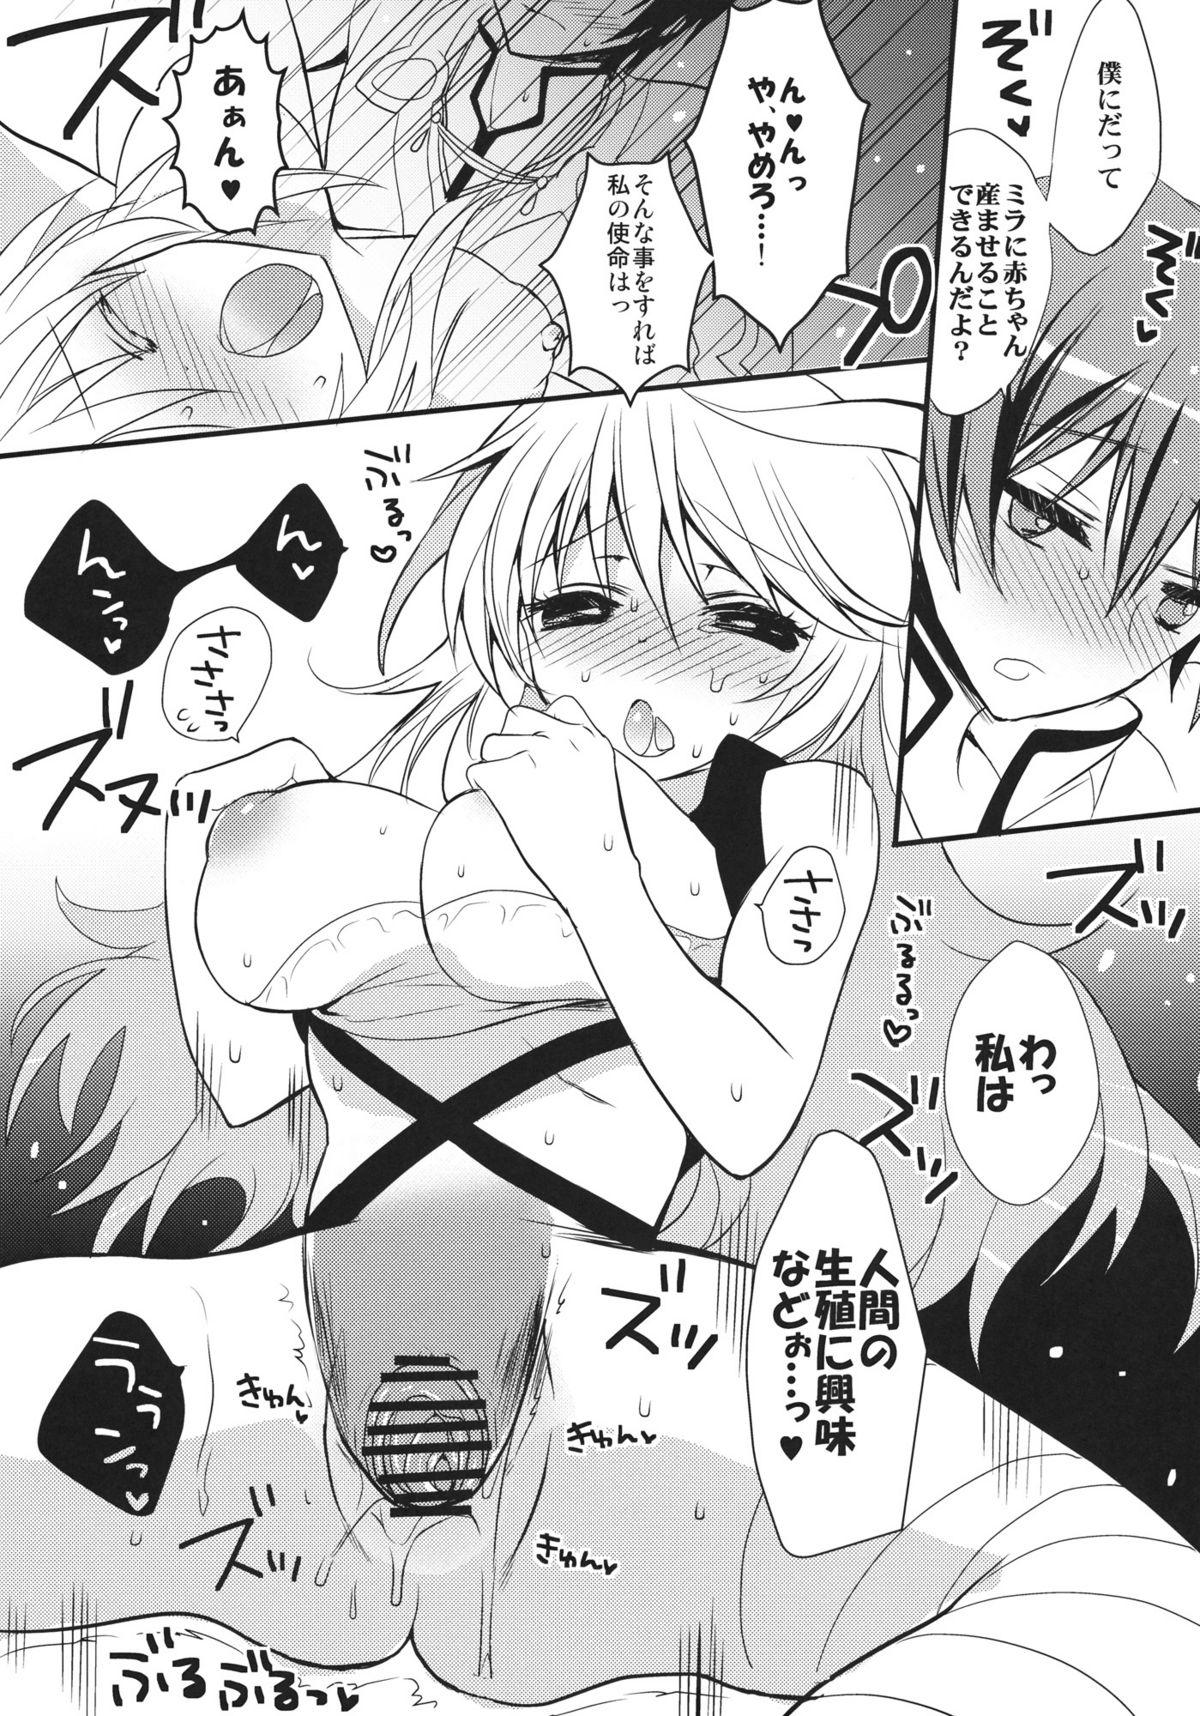 Esposa fairy's SEX - Tales of xillia Doublepenetration - Page 8